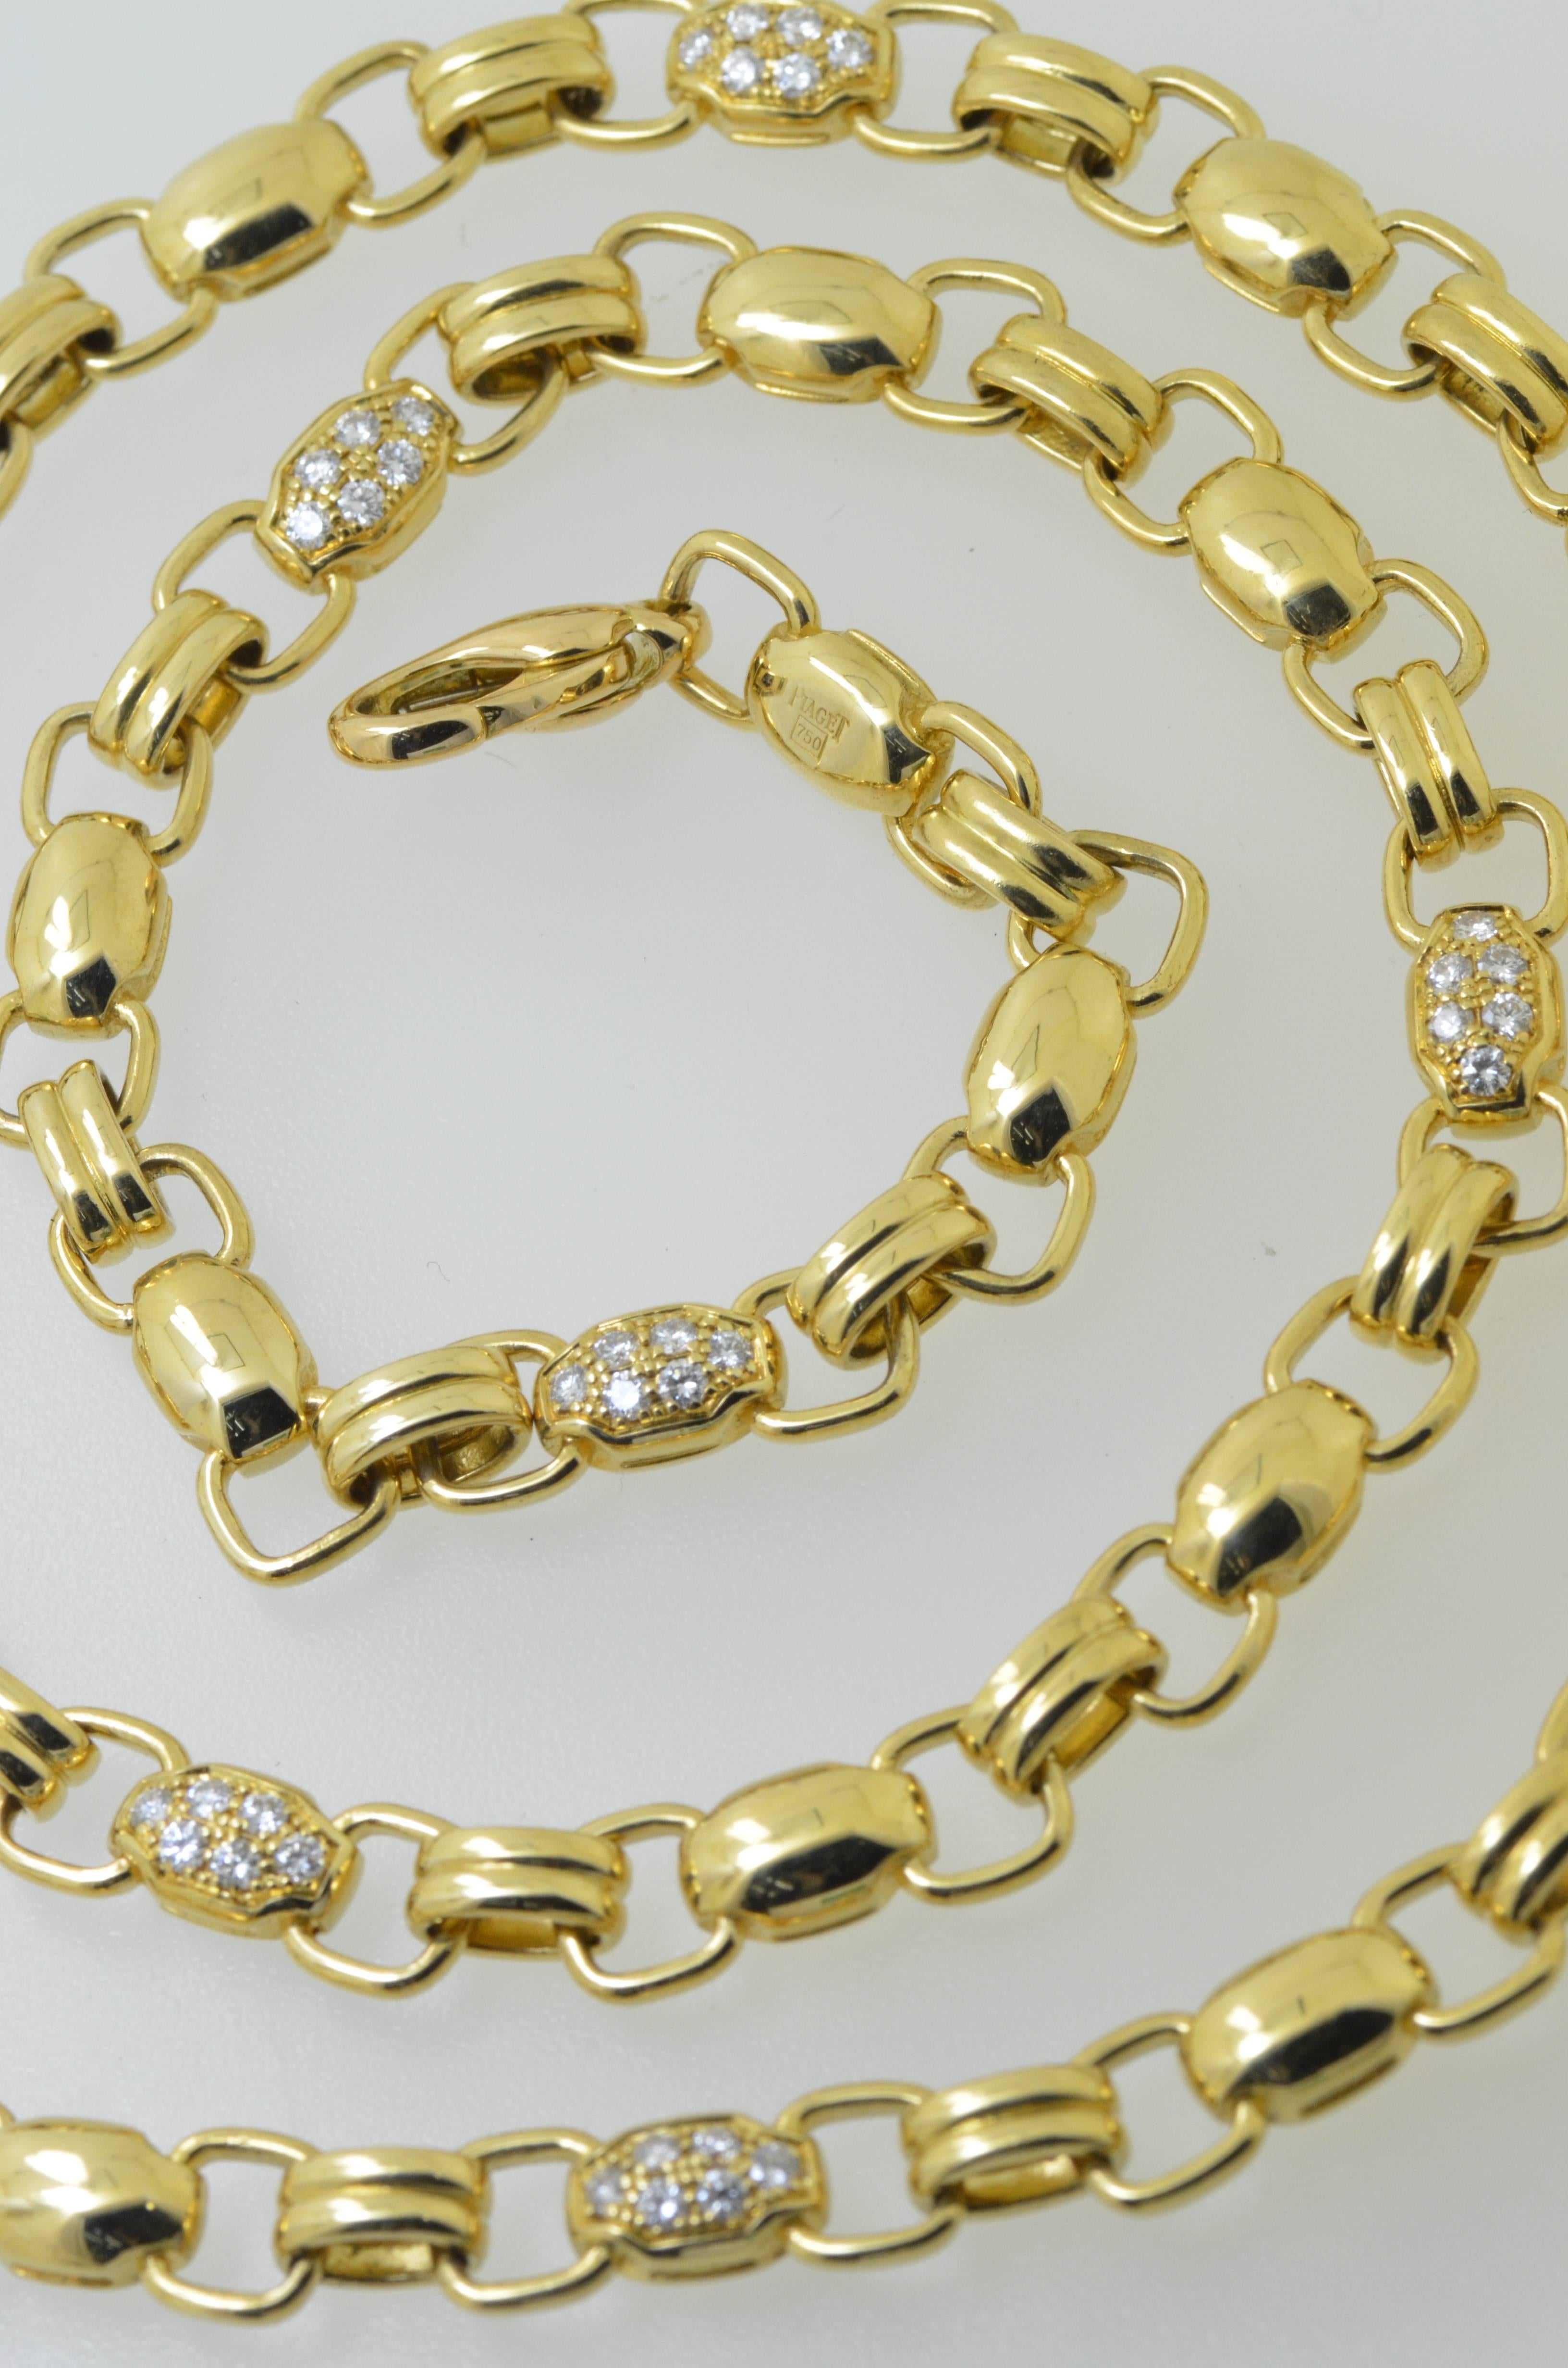 Weight 102g Length 60 cm 18 karat yellow gold, 108 clean white brilliant cut diamonds, signed Piaget circa 1970.

More photos may be requested.